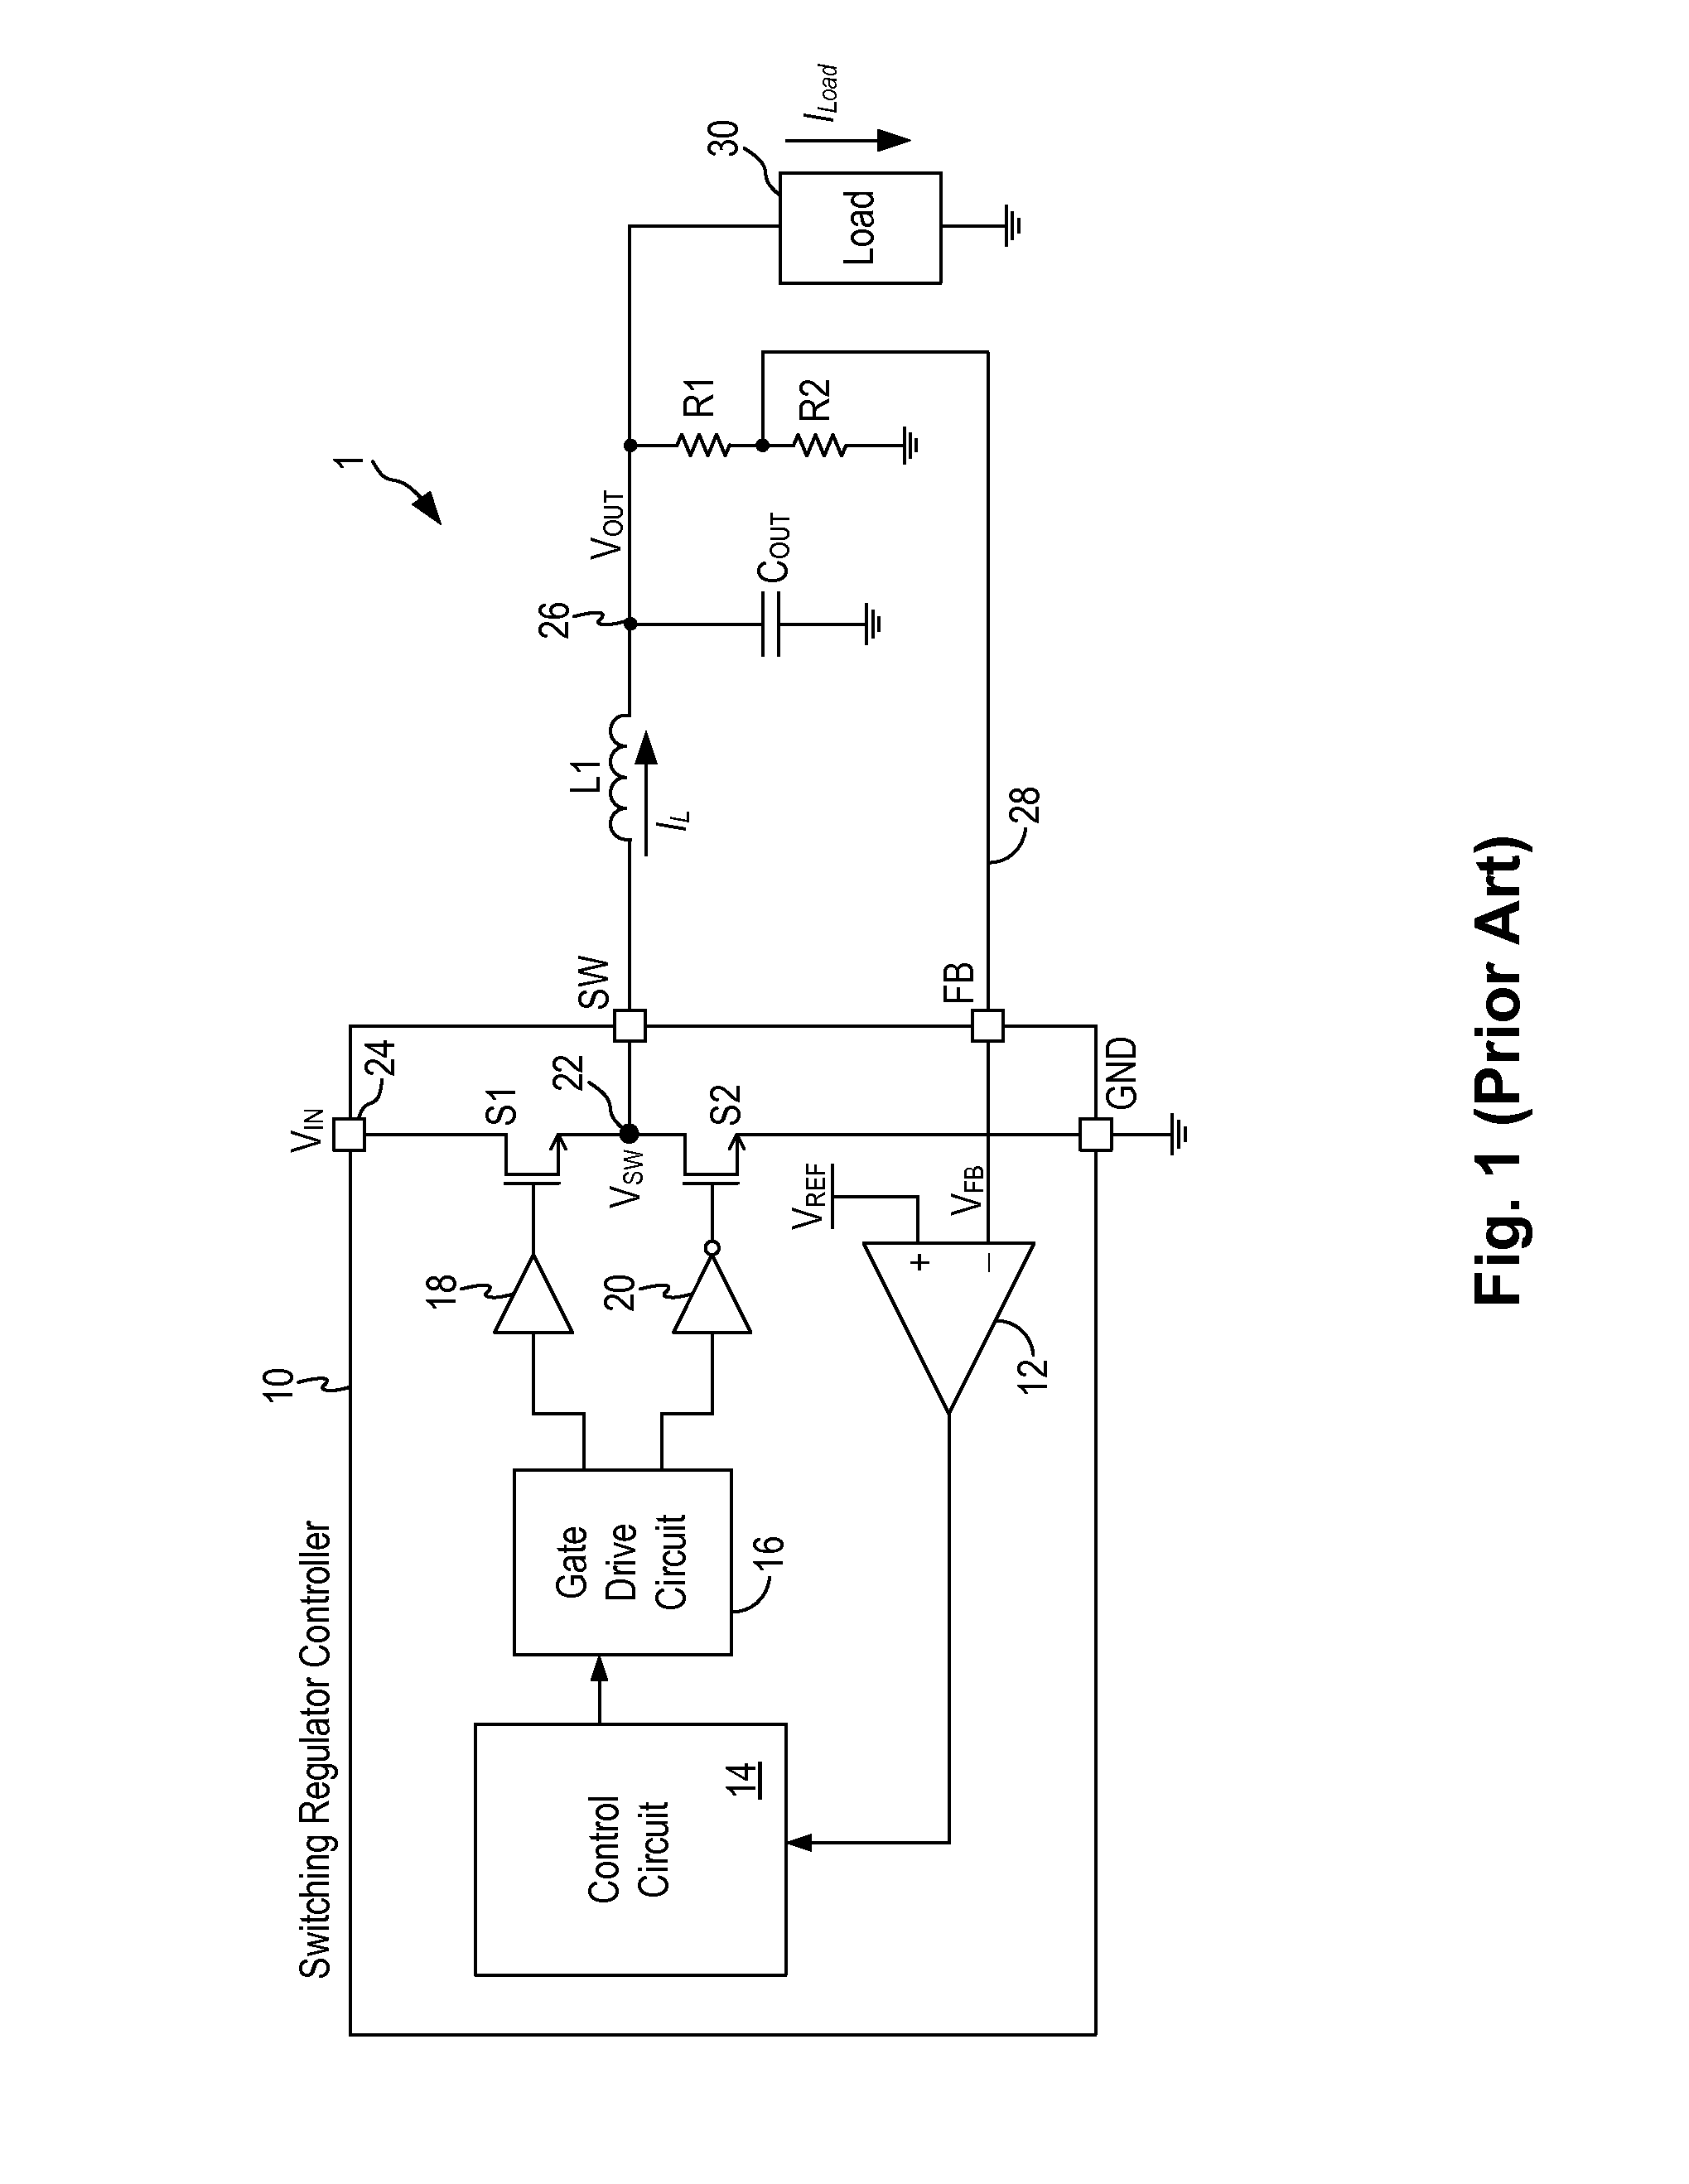 Multi-Phase Power Block For a Switching Regulator for use with a Single-Phase PWM Controller